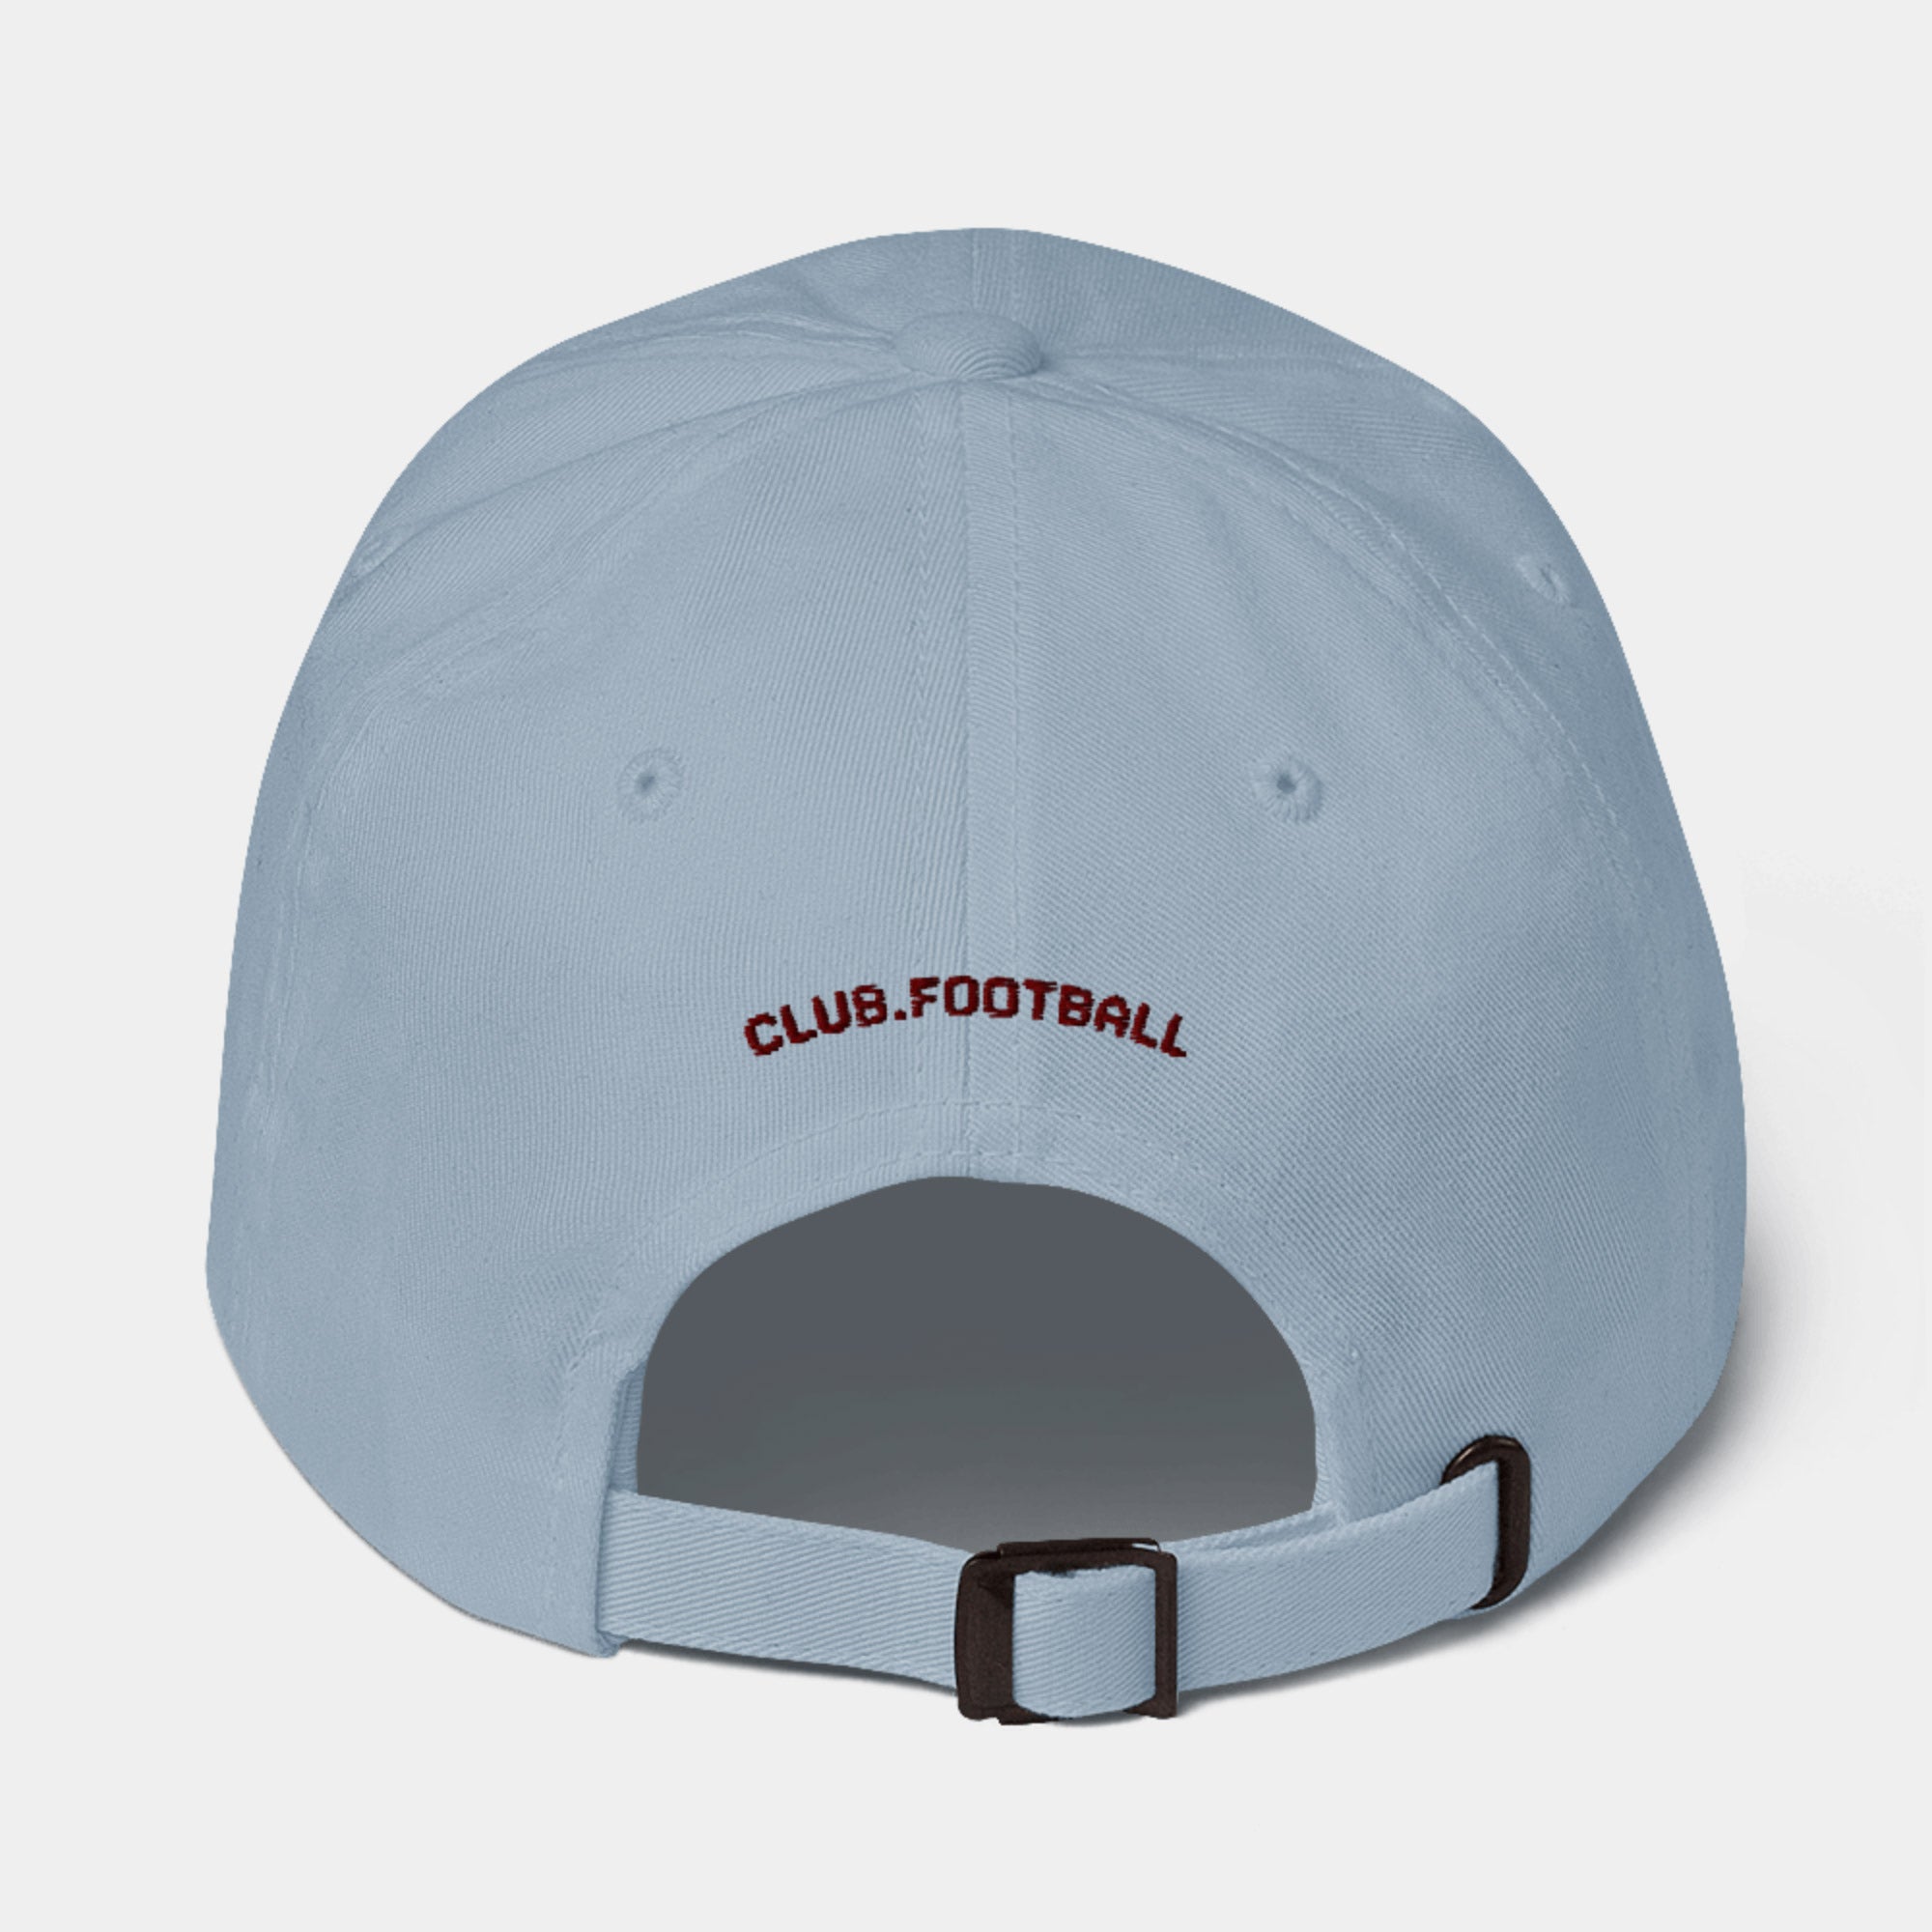 The Holte End (AVFC) Cap